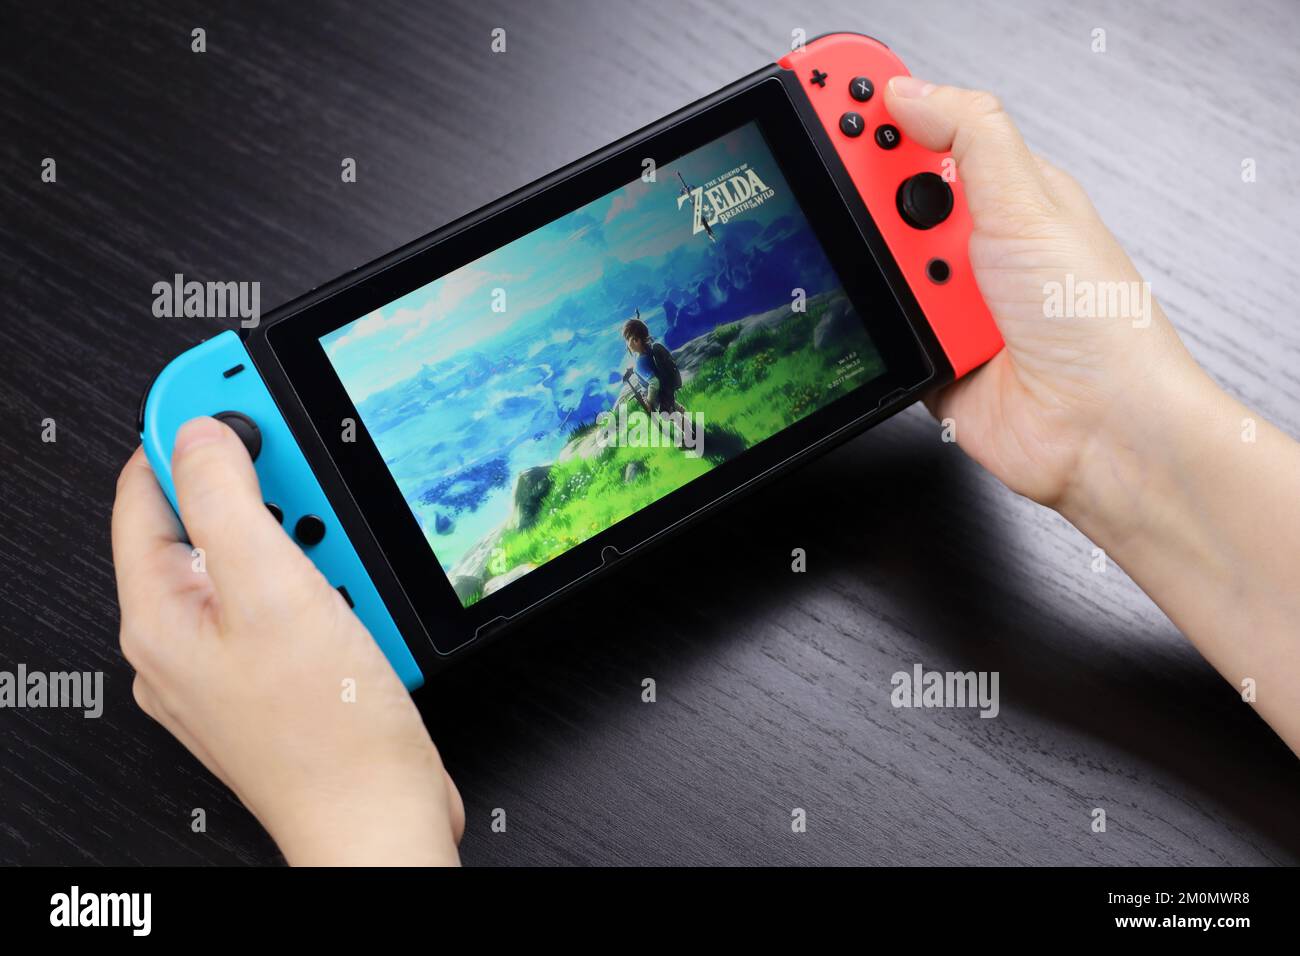 Girl playing The Legend of Zelda game on Nintendo Switch console in handheld mode, selective focus on a screen Stock Photo